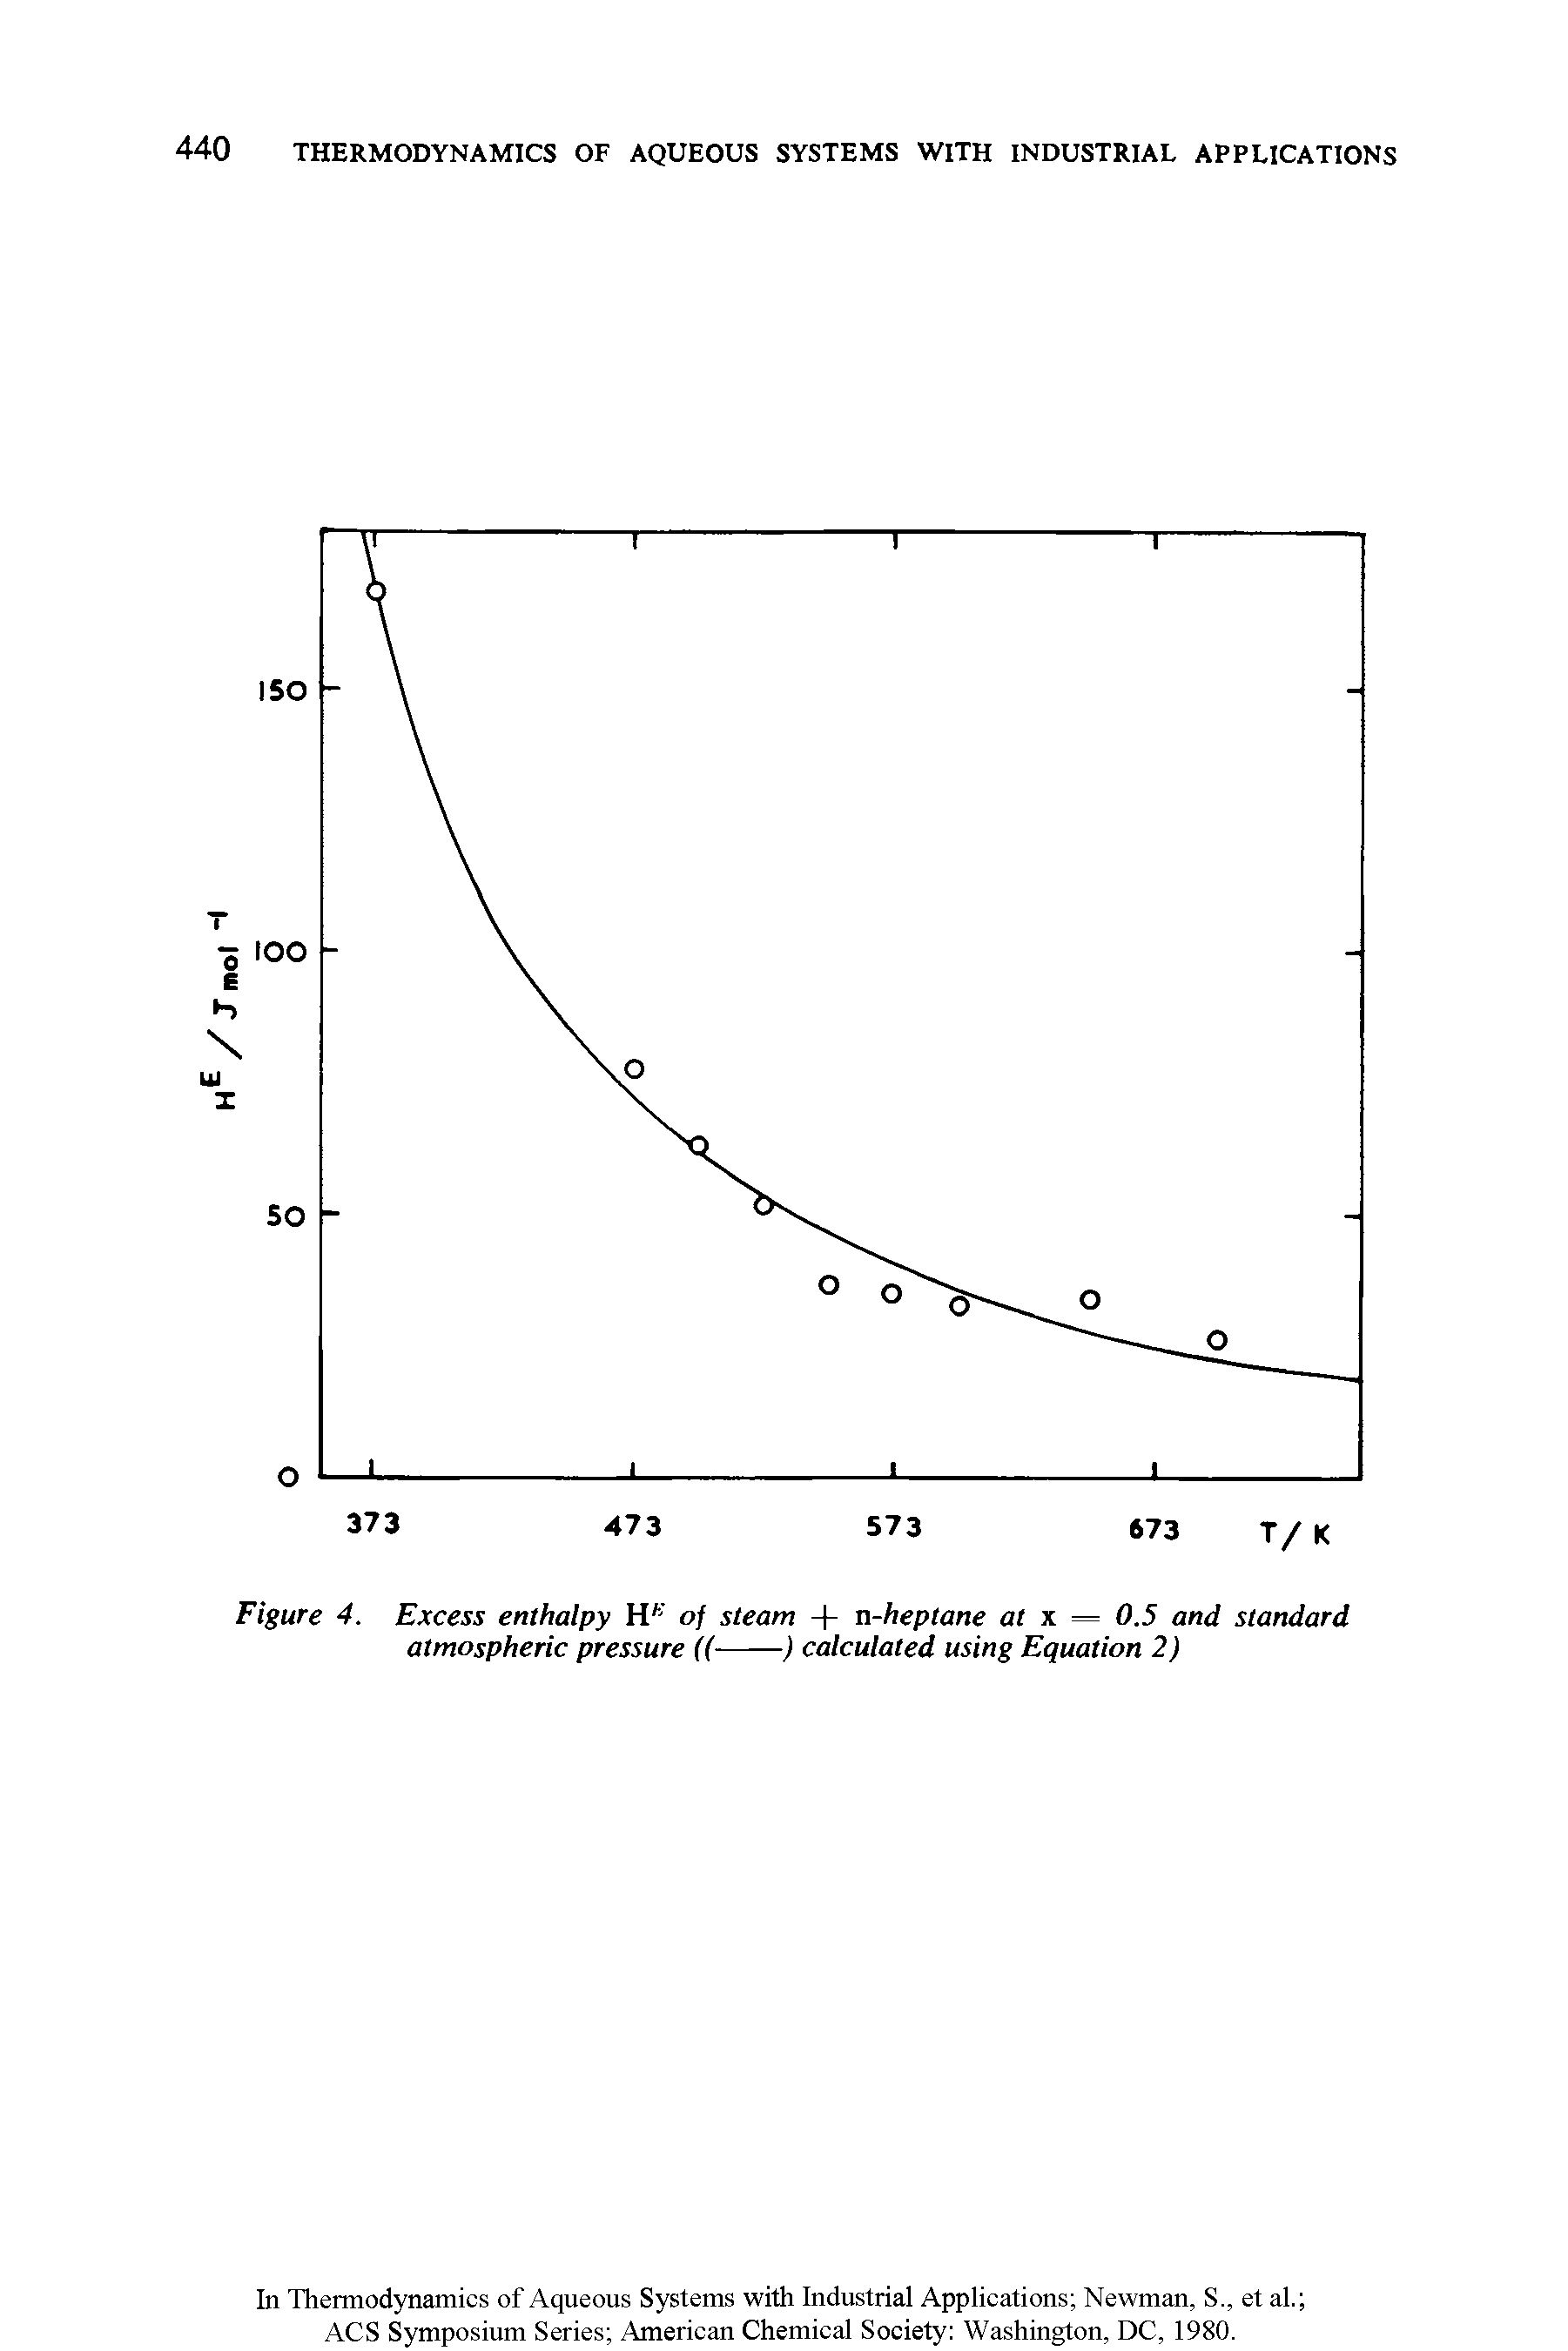 Figure 4. Excess enthalpy H of steam + n-heptane at x — 0.5 and standard atmospheric pressure ((---------------) calculated using Equation 2)...